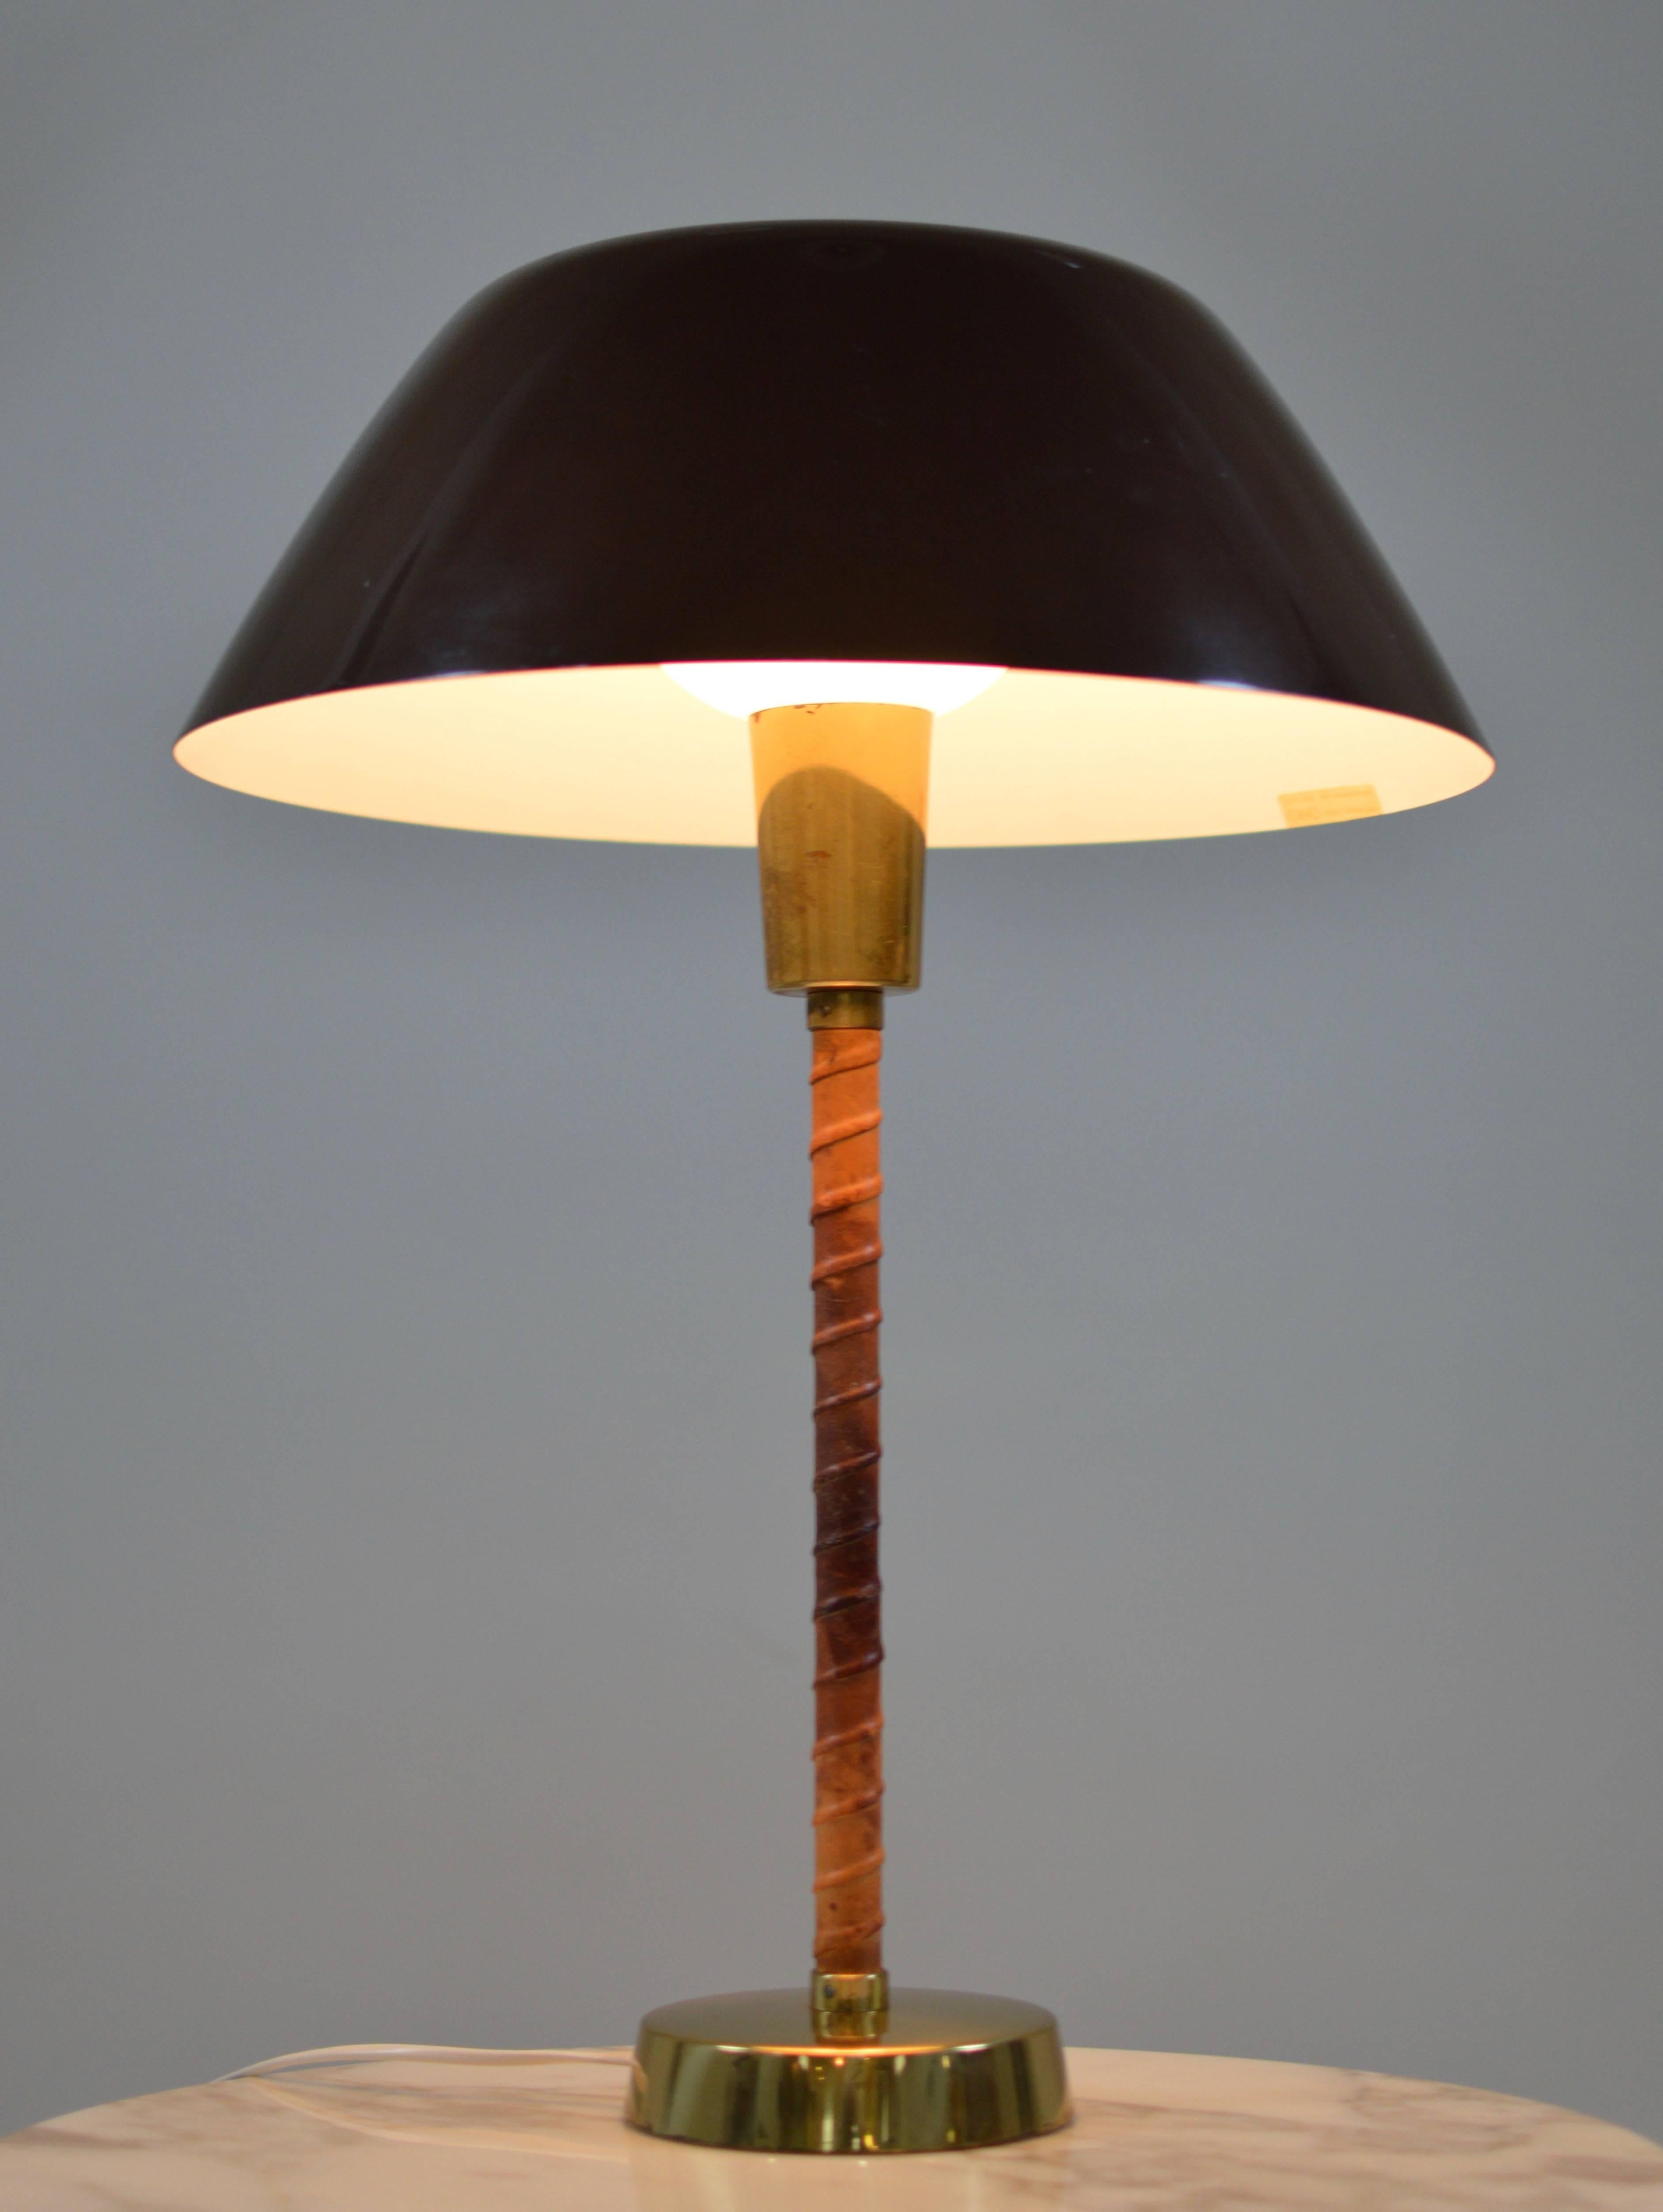 Scandinavian Modern Lisa Johansson-Pape Brass and Leather Table Lamp by Orno